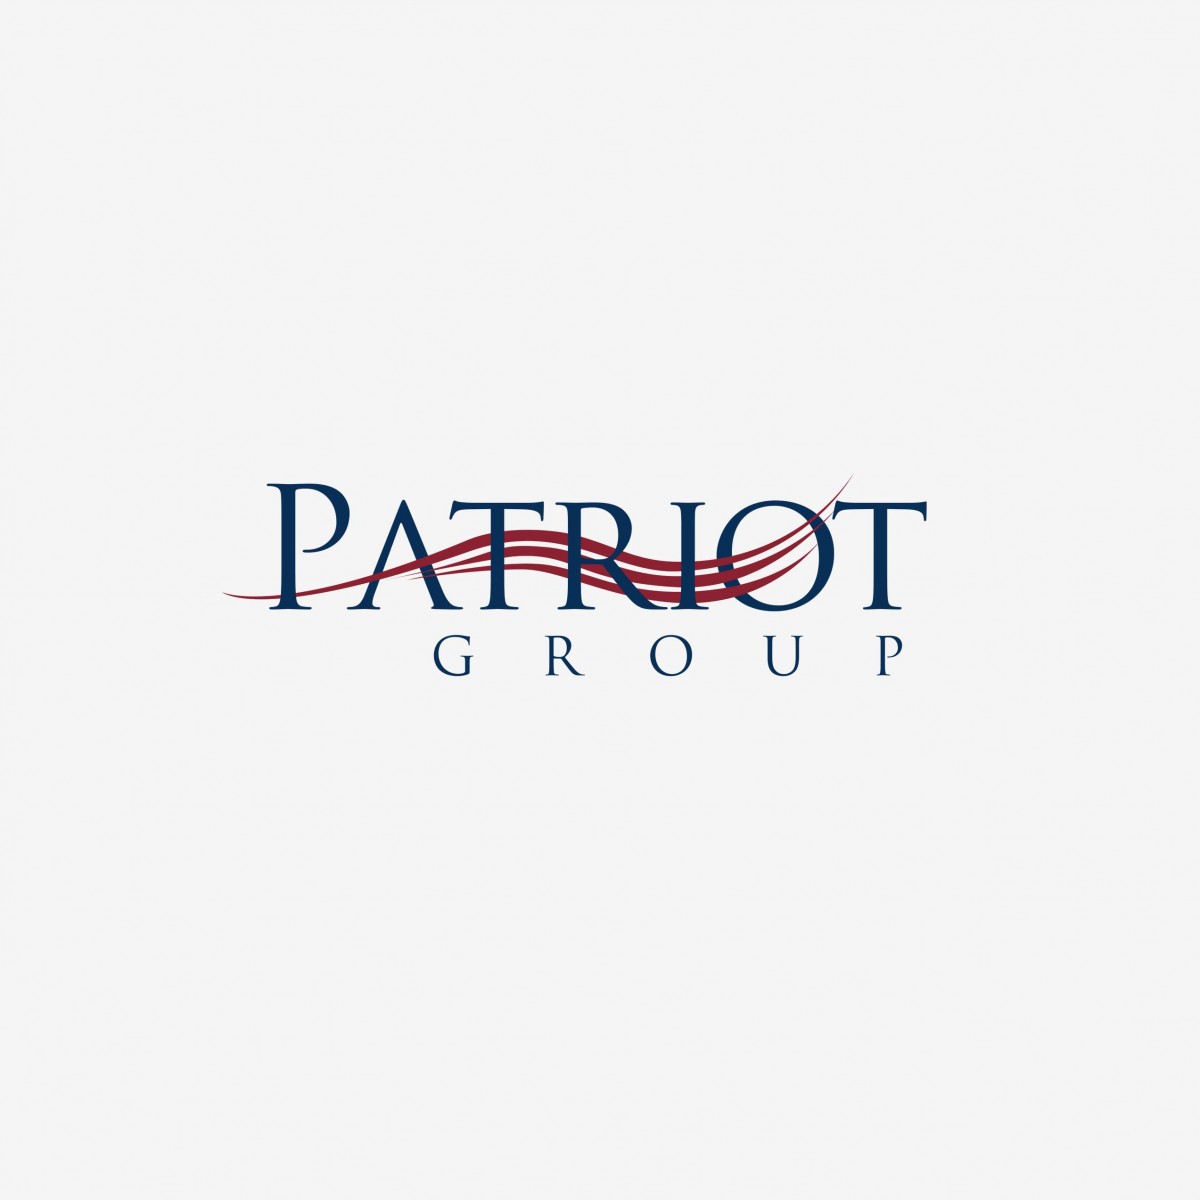 The Patriot Group corporate identity